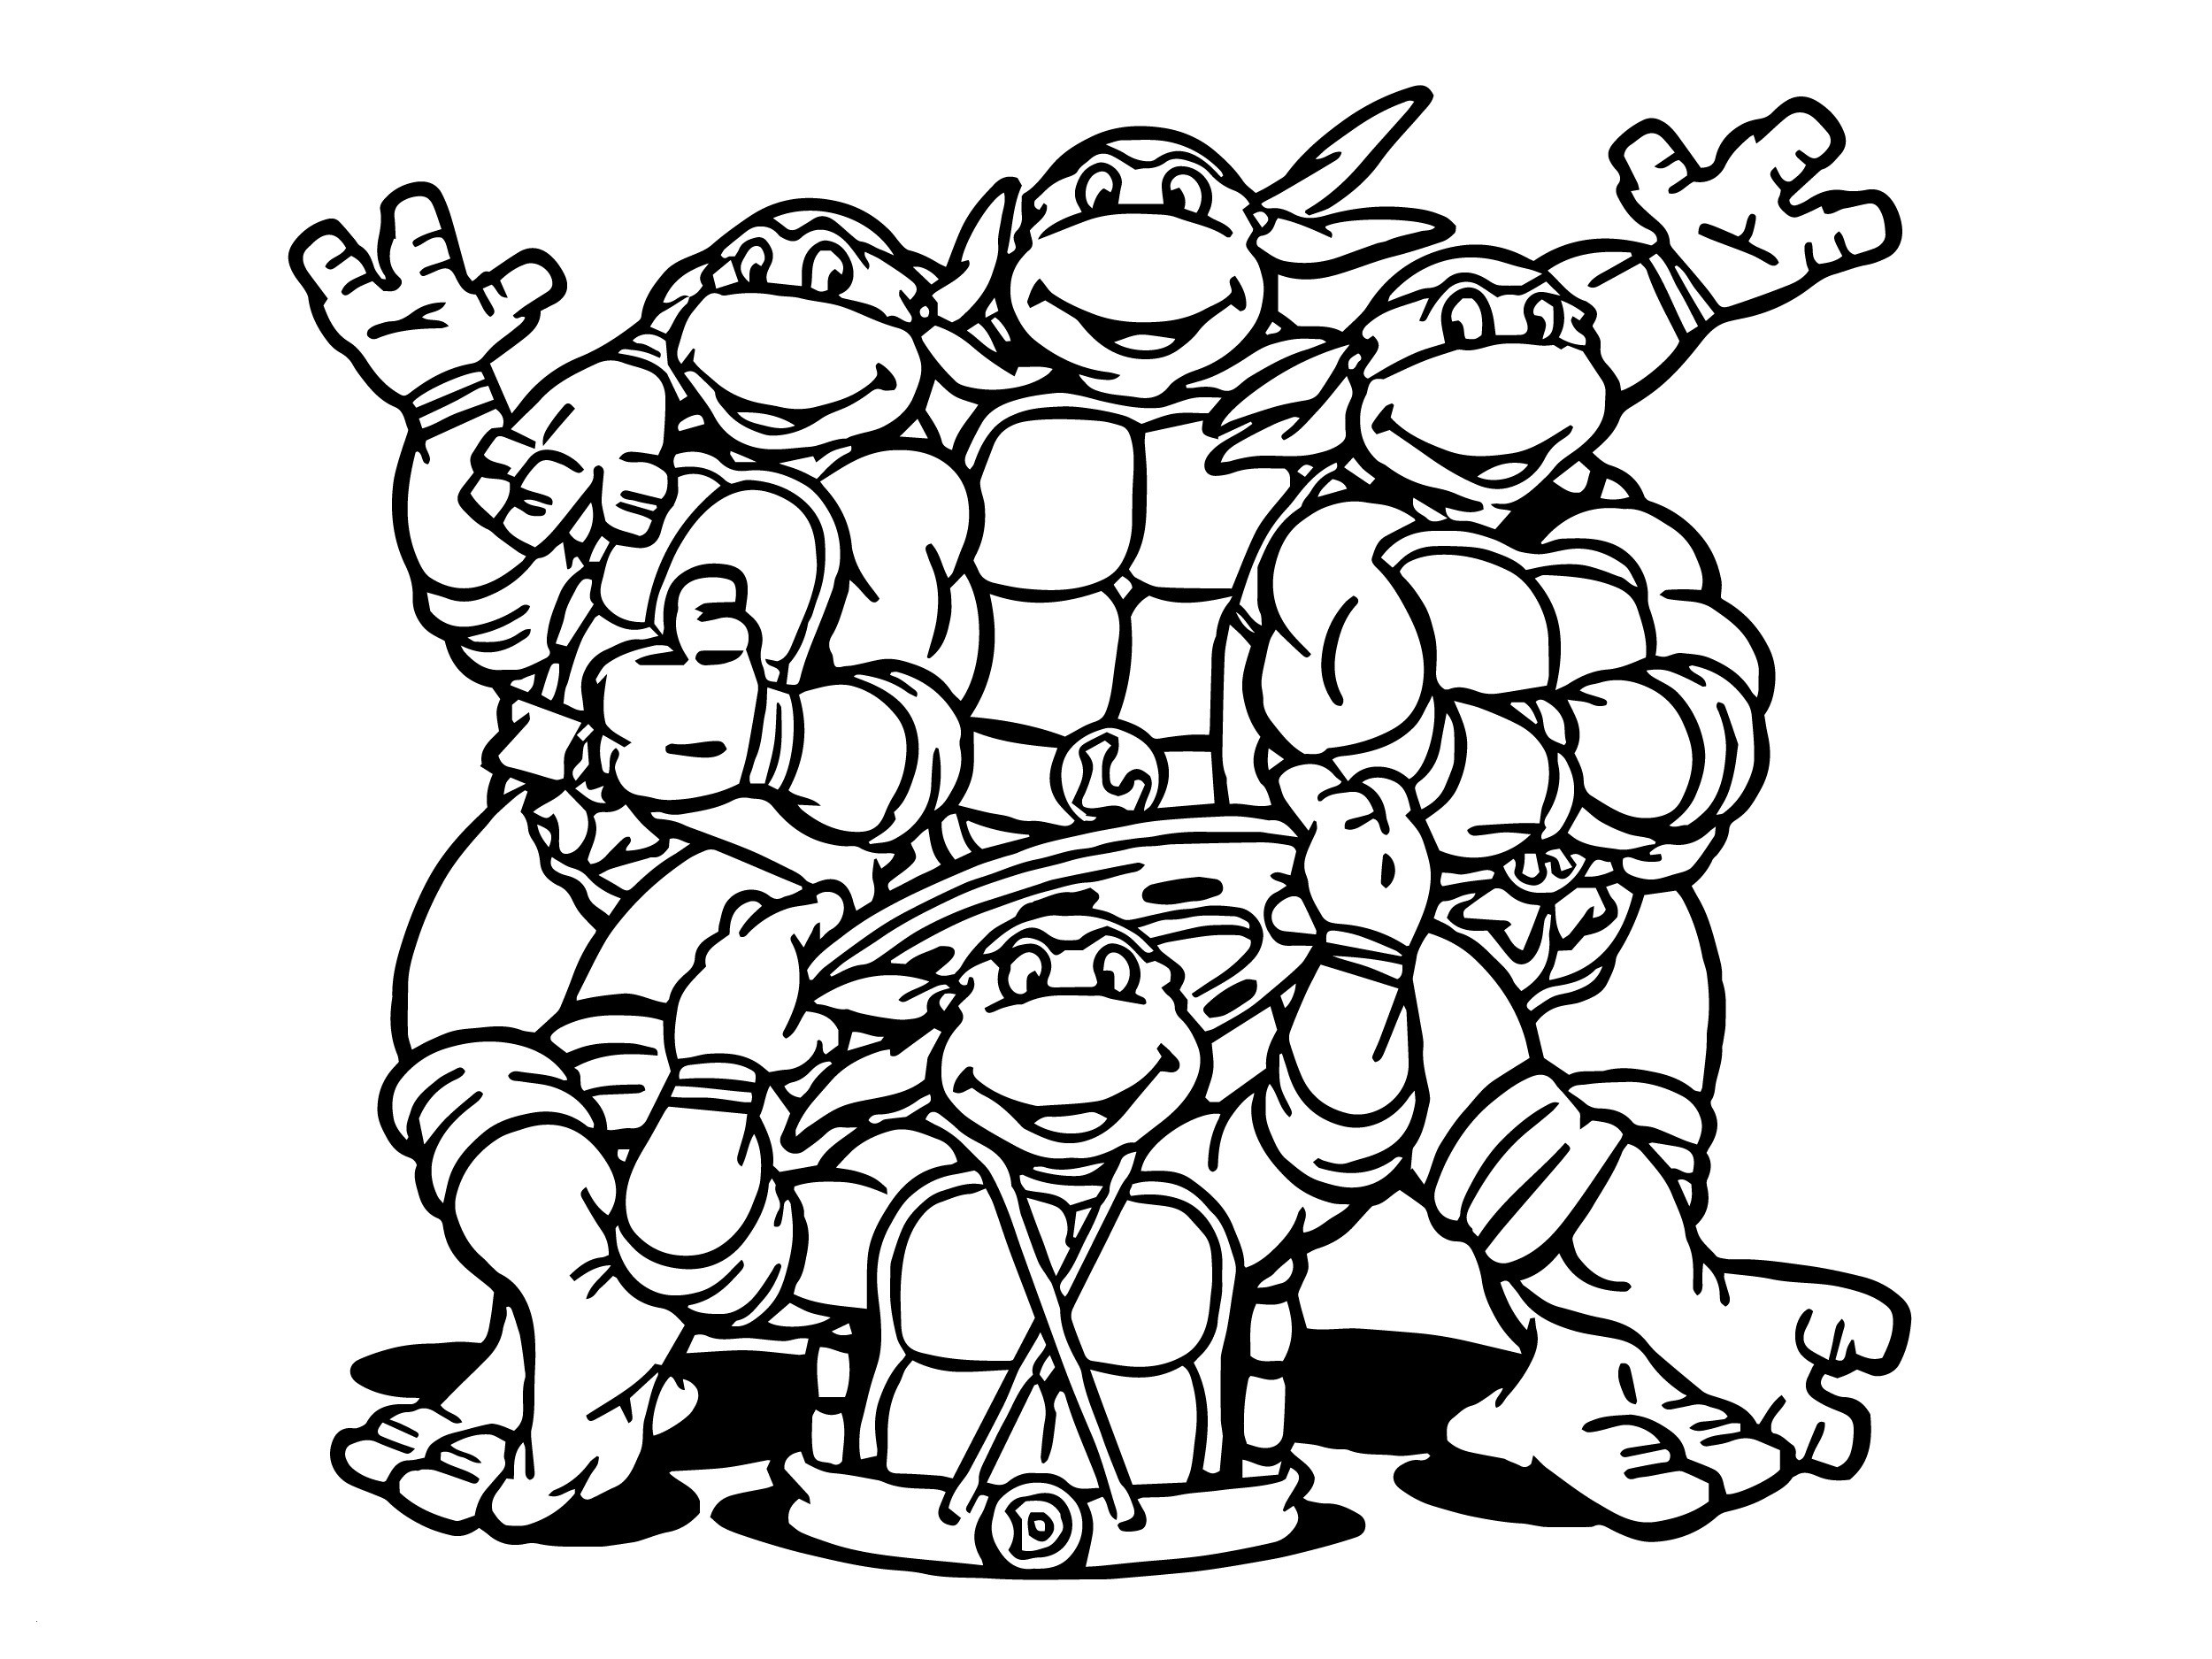 Free Coloring Pages For Boys Turtle
 Teenage Mutant Ninja Turtles Coloring Pages Best